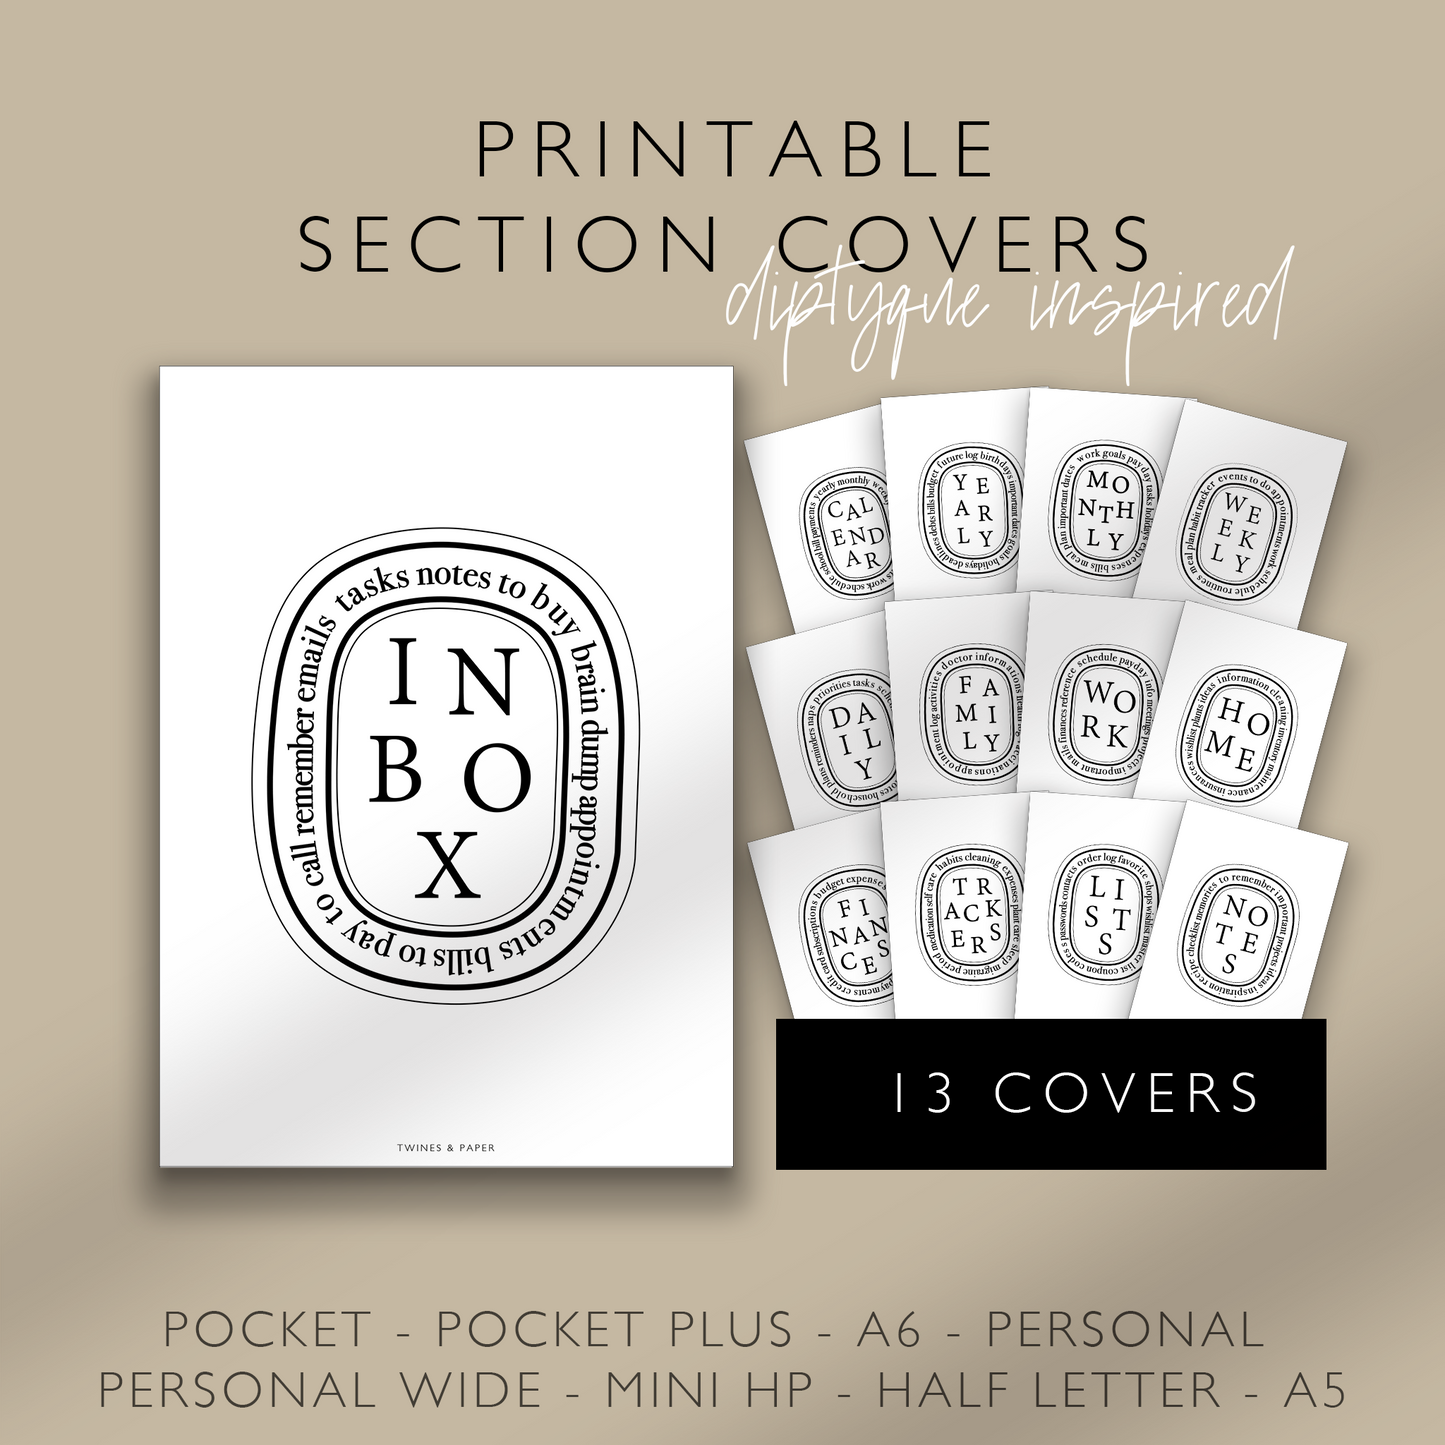 "Diptyque Inspired Section Covers" Printable Dashboards 13 Covers